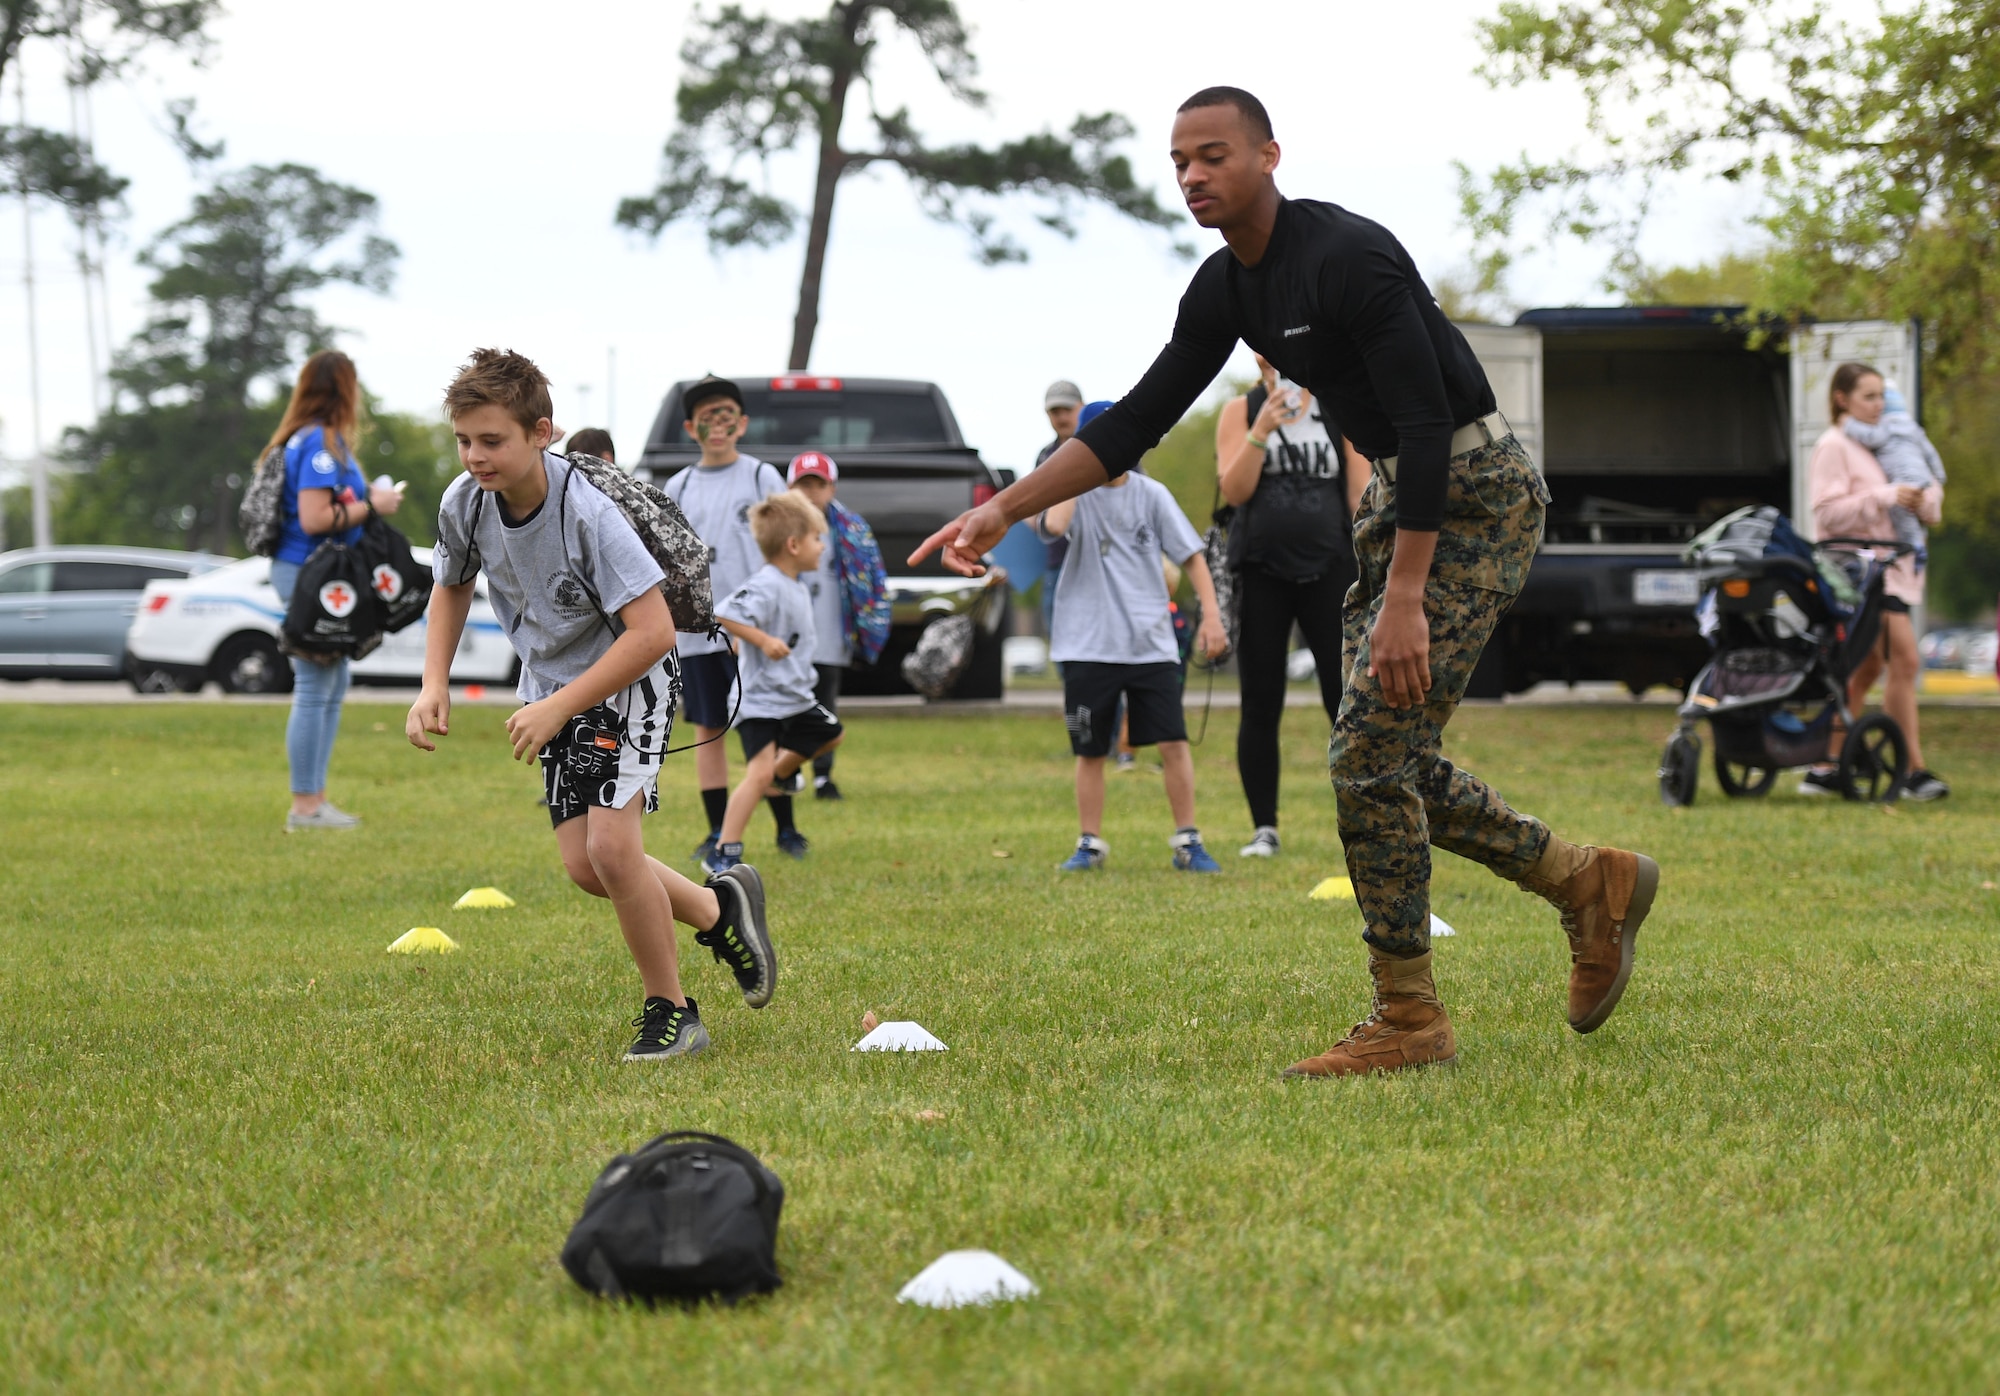 U.S. Marine Private First Class Moises Gomes, Keesler Marine Detachment student, and Espen Padgett, son of Tech. Sgt. Derek Padgett, 334th Training Squadron instructor, participate in an obstacle course during Operation Hero at Keesler Air Force Base, Mississippi, April 2, 2022. The event, hosted by the Airman and Family Readiness Center in recognition of the Month of the Military Child, gave military children a glimpse into the lives of deployed military members. Children received Operation Hero dog tags and t-shirts as they made their way through a mock deployment line as well as the opportunity to experience medical triage demonstrations, military working dog demonstrations and have their faces painted. (U.S. Air Force photo by Kemberly Groue)